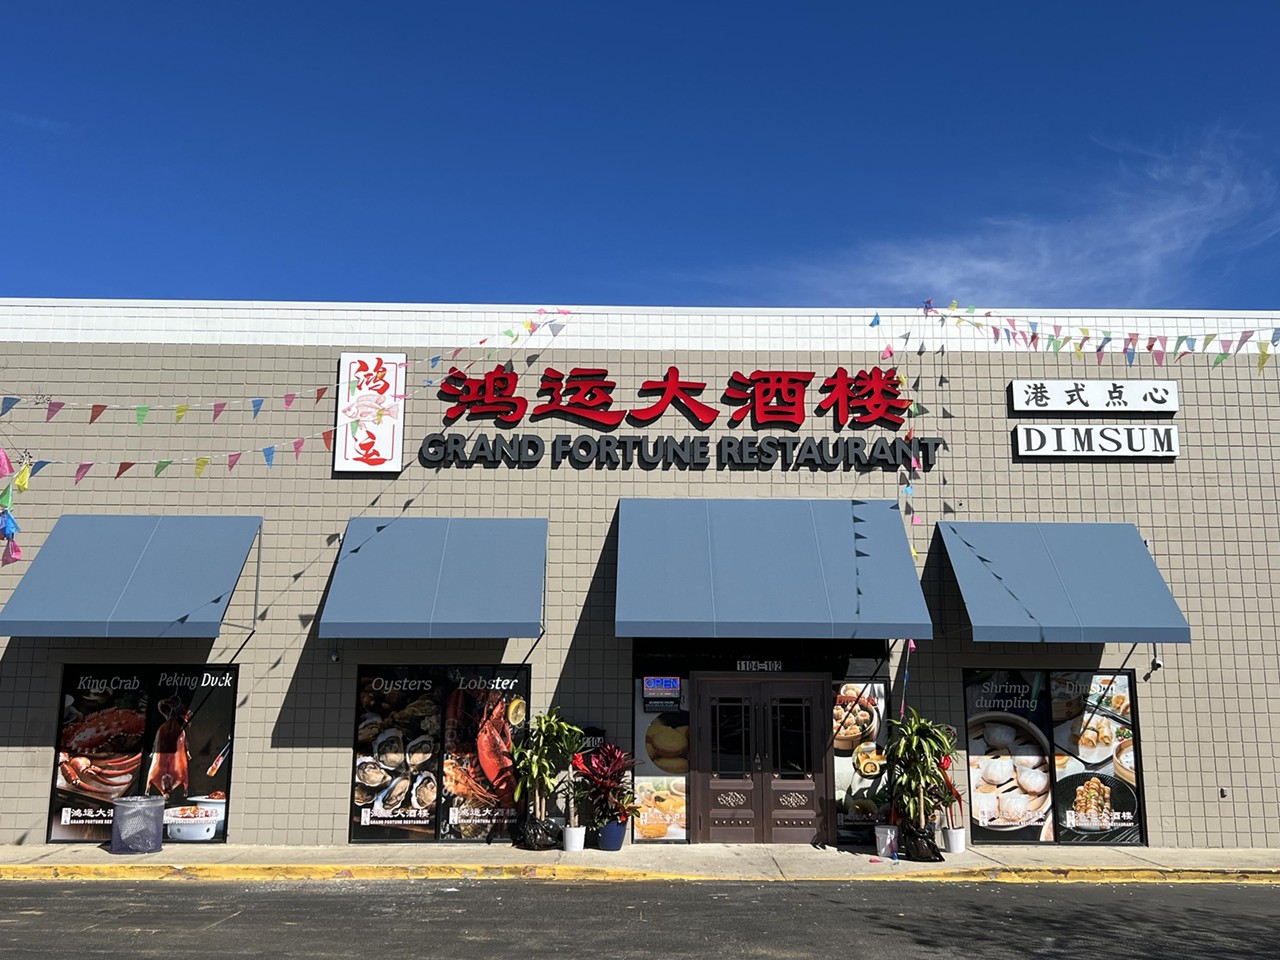 
Grand Fortune
1104 E Fowler Ave. No. 102, Tampa
New dim sum-focused restaurant Grand Fortune made its debut in North Tampa last January, and its massive menu and dining room may set it apart from the dozens of other Chinese restaurants throughout the Bay area. Located in the same plaza that houses MD Oriental and Boil Spot Hot Pot and BBQ, the concept's large dining room boasts about 20 tables, a stage for performances, tanks filled with live seafood and a few private rooms that are still under construction. Folks can indulge in Grand Fortune’s regular menu of family-style entrees like Mai Fun noodles, salt and pepper shrimp, roasted Peking duck and sweet and sour spare ribs or opt for traditional dim sum service where a variety of dumplings, steamed buns and other small plates are wheeled from table to table on carts.
Photo by Kyla Fields